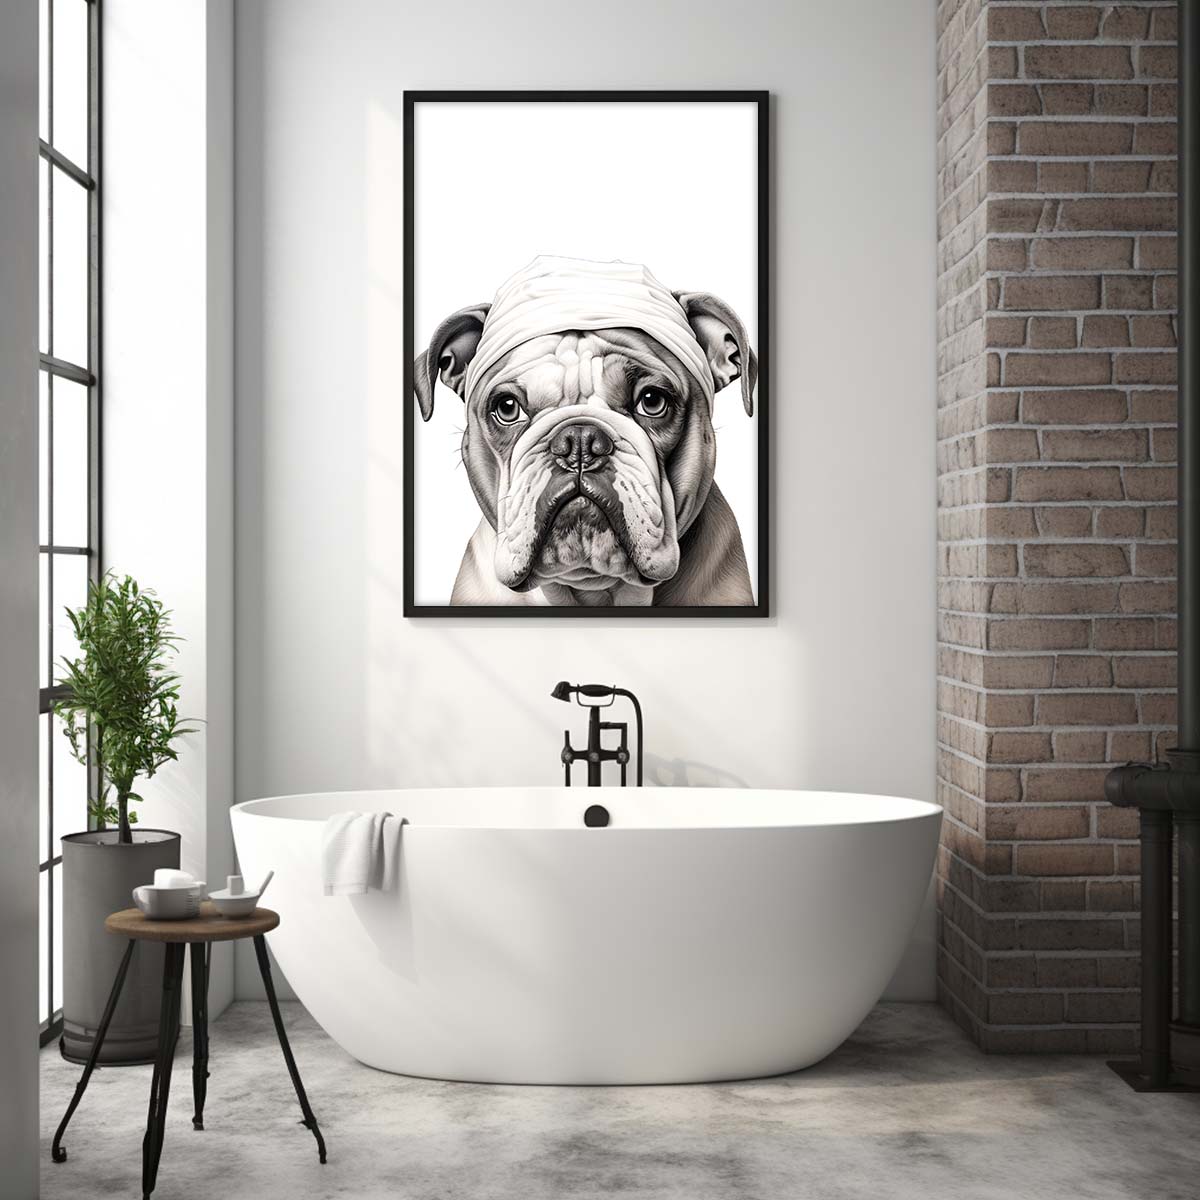 Bulldog With Toilet Paper, Canvas Or Poster, Funny Dog Art, Bathroom Wall Decor, Home Decor, Bathroom Wall Art, Dog Wall Decor, Animal Decor, Pet Gift, Pet Illustration, Digital Download